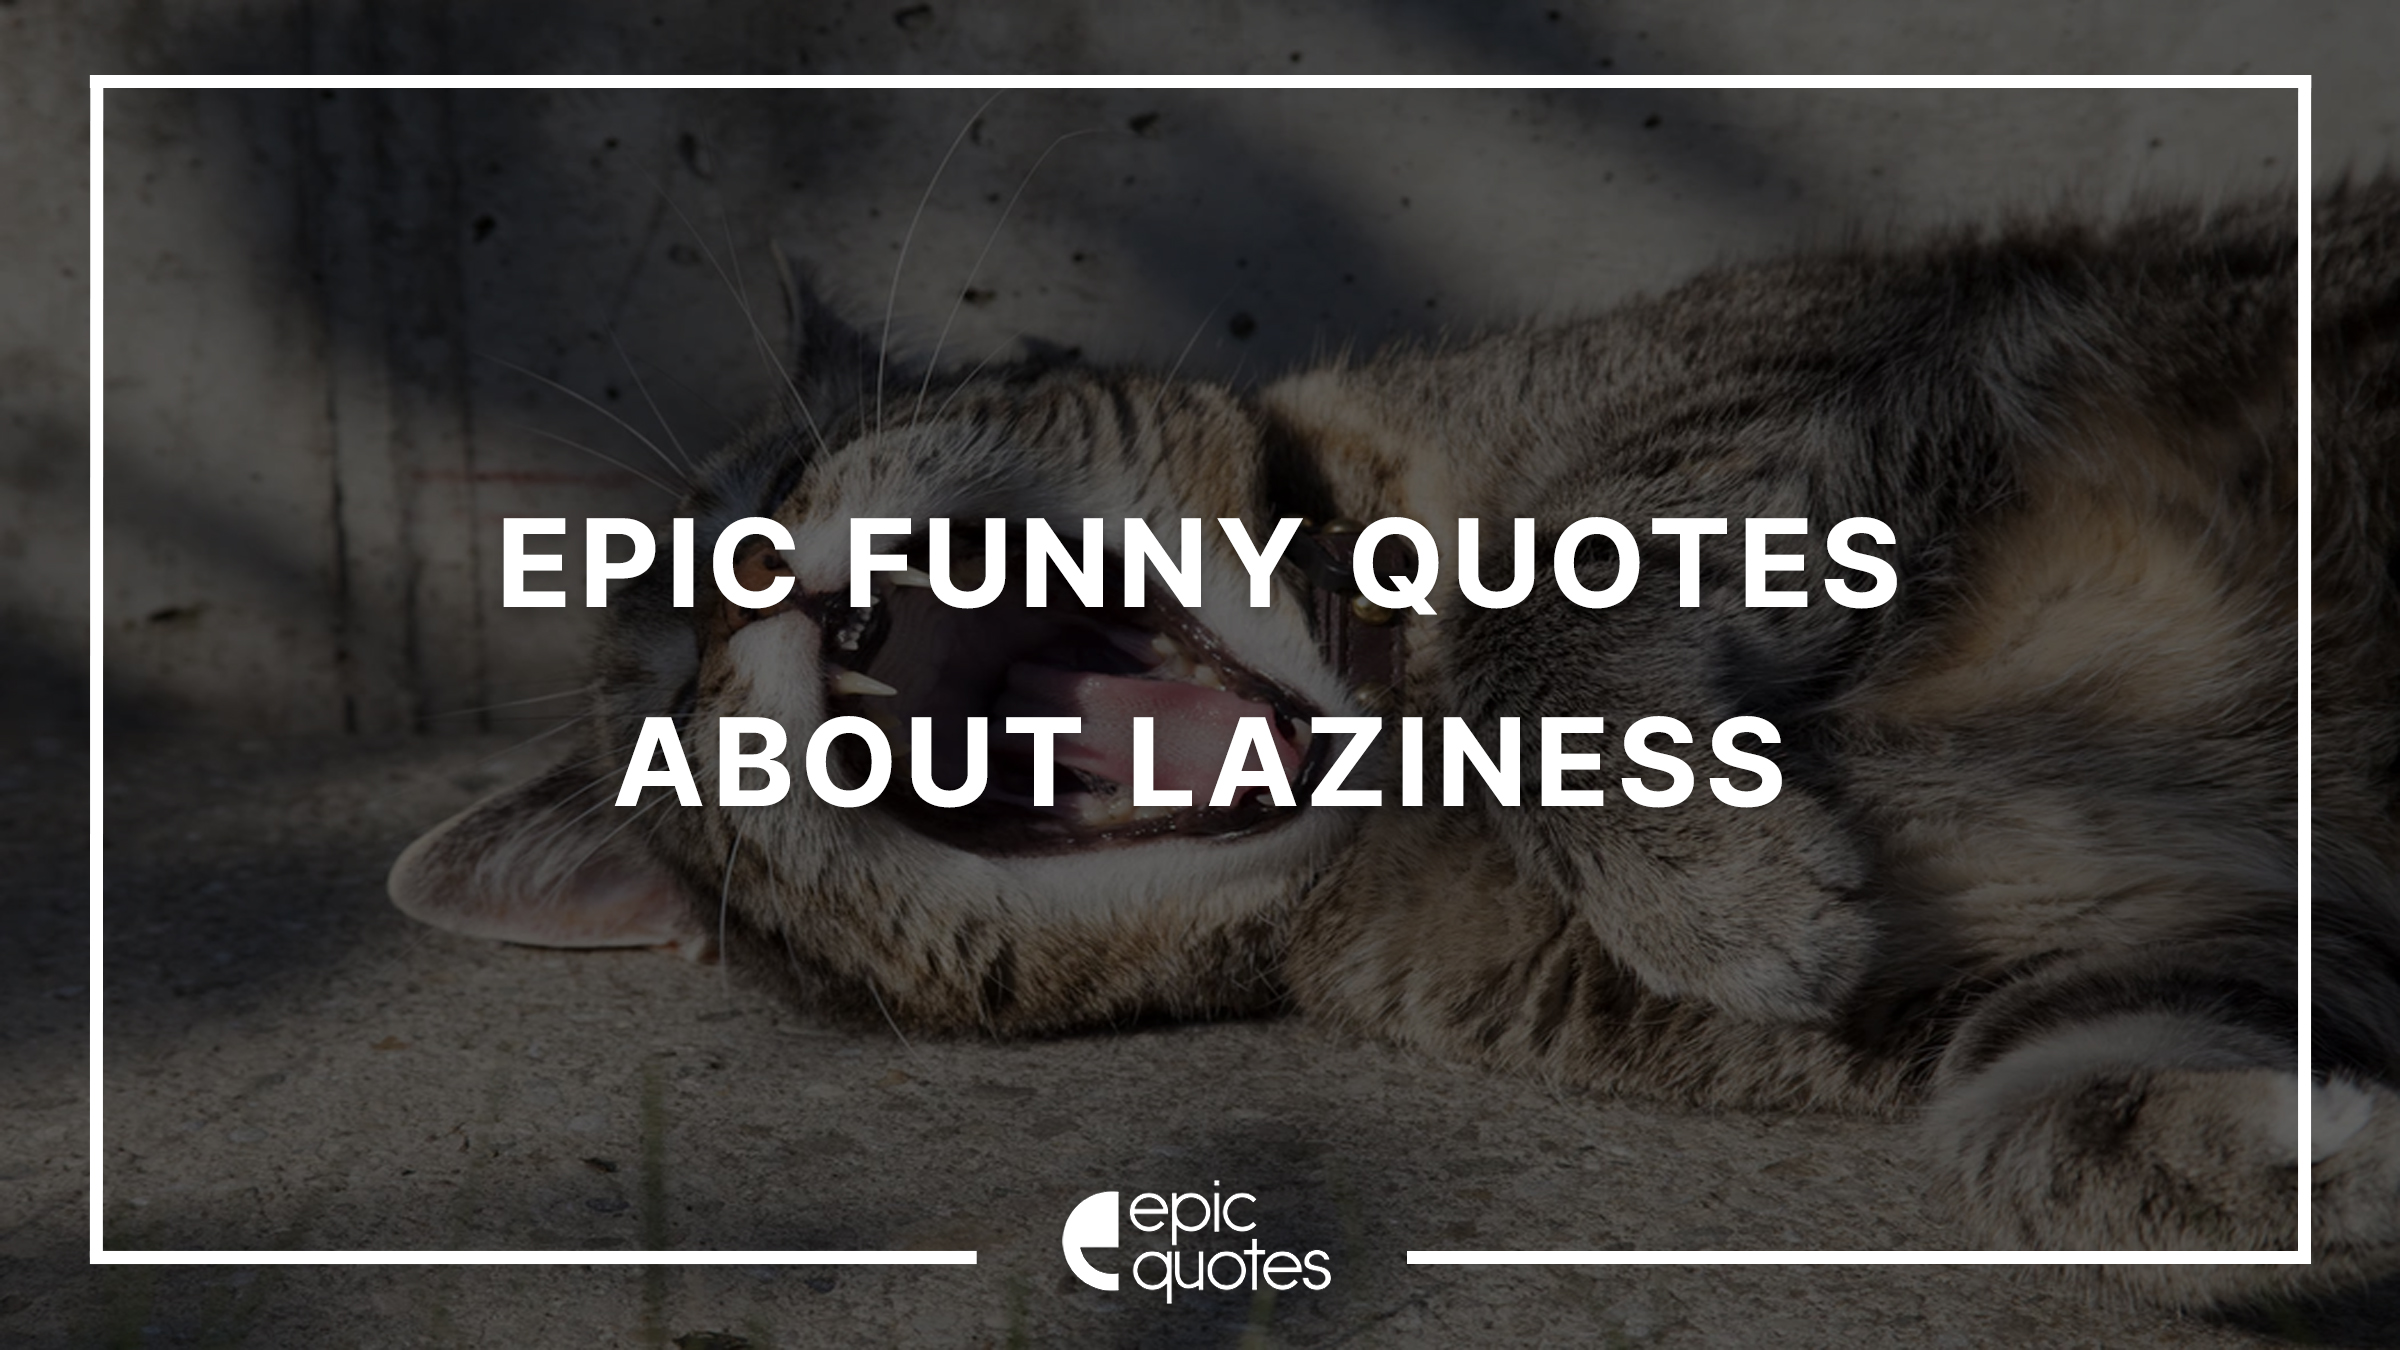 Epic Funny Quotes About Laziness During Quarantine - Epic Quotes